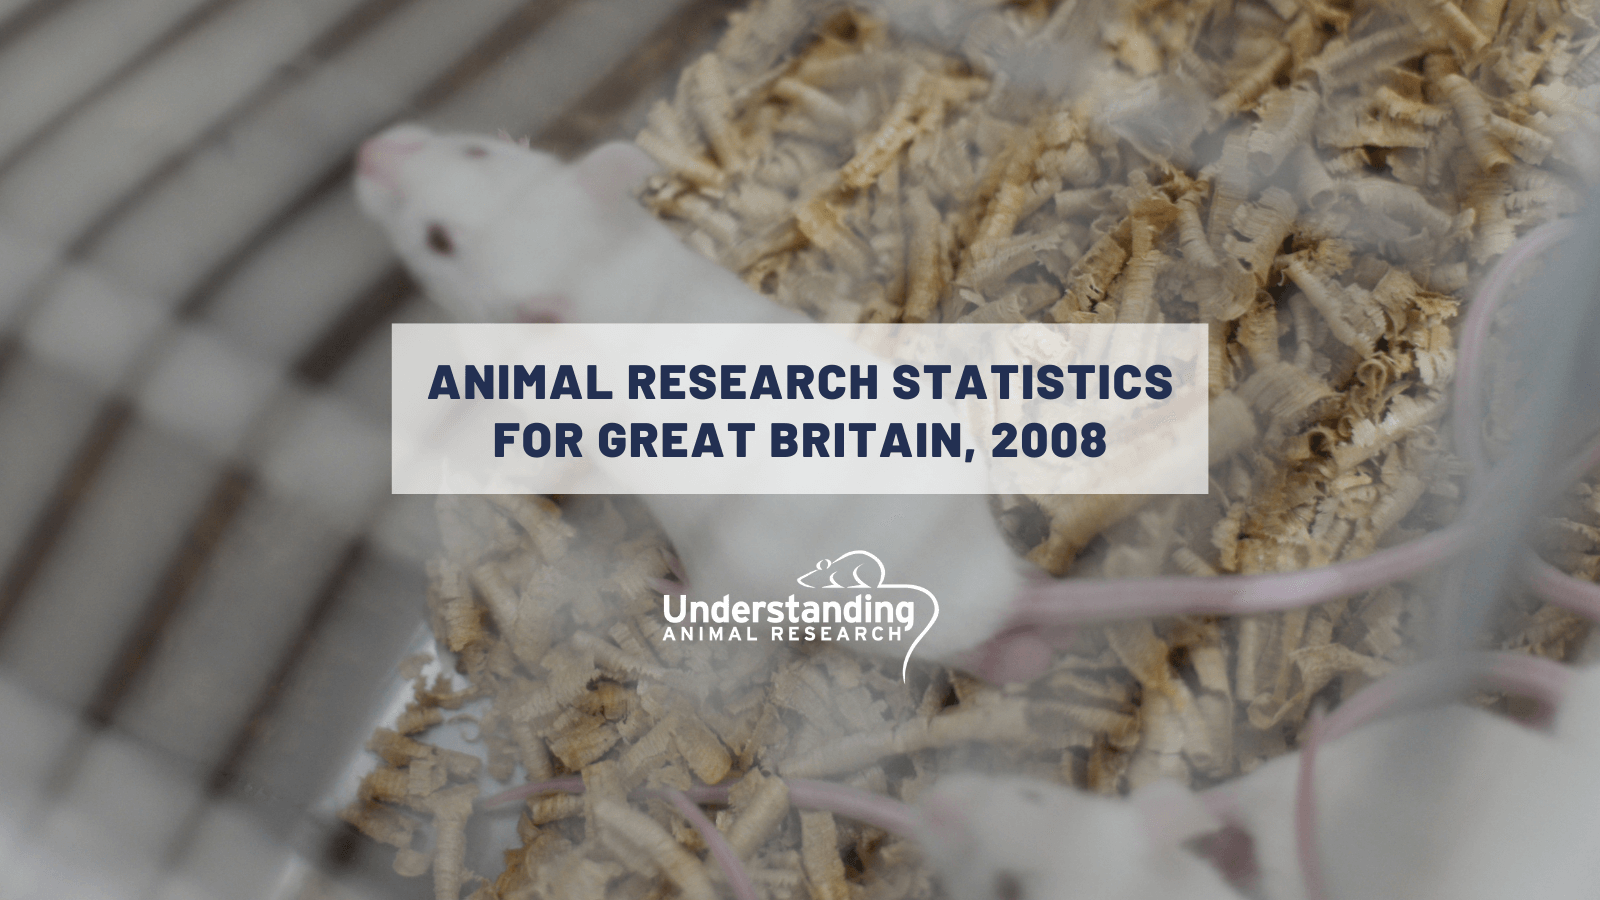 Animal research statistics for Great Britain, 2008